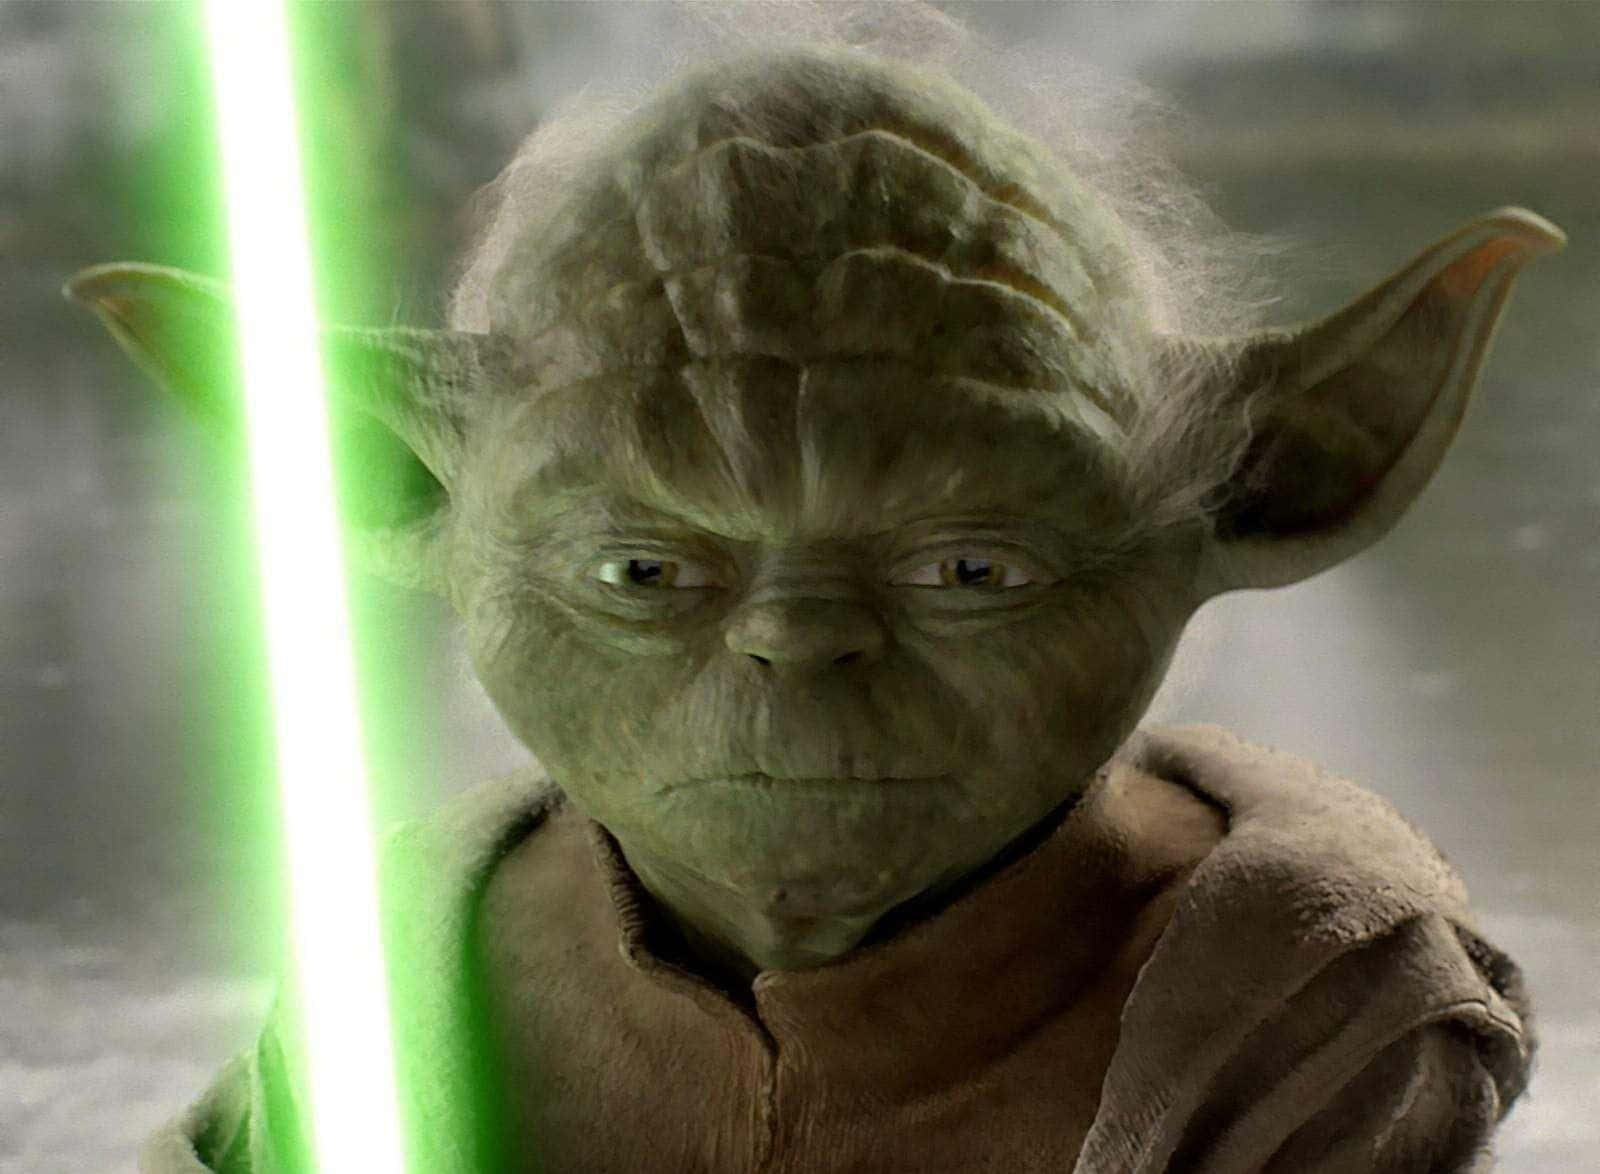 "Do, or do not. There is no try." - Yoda